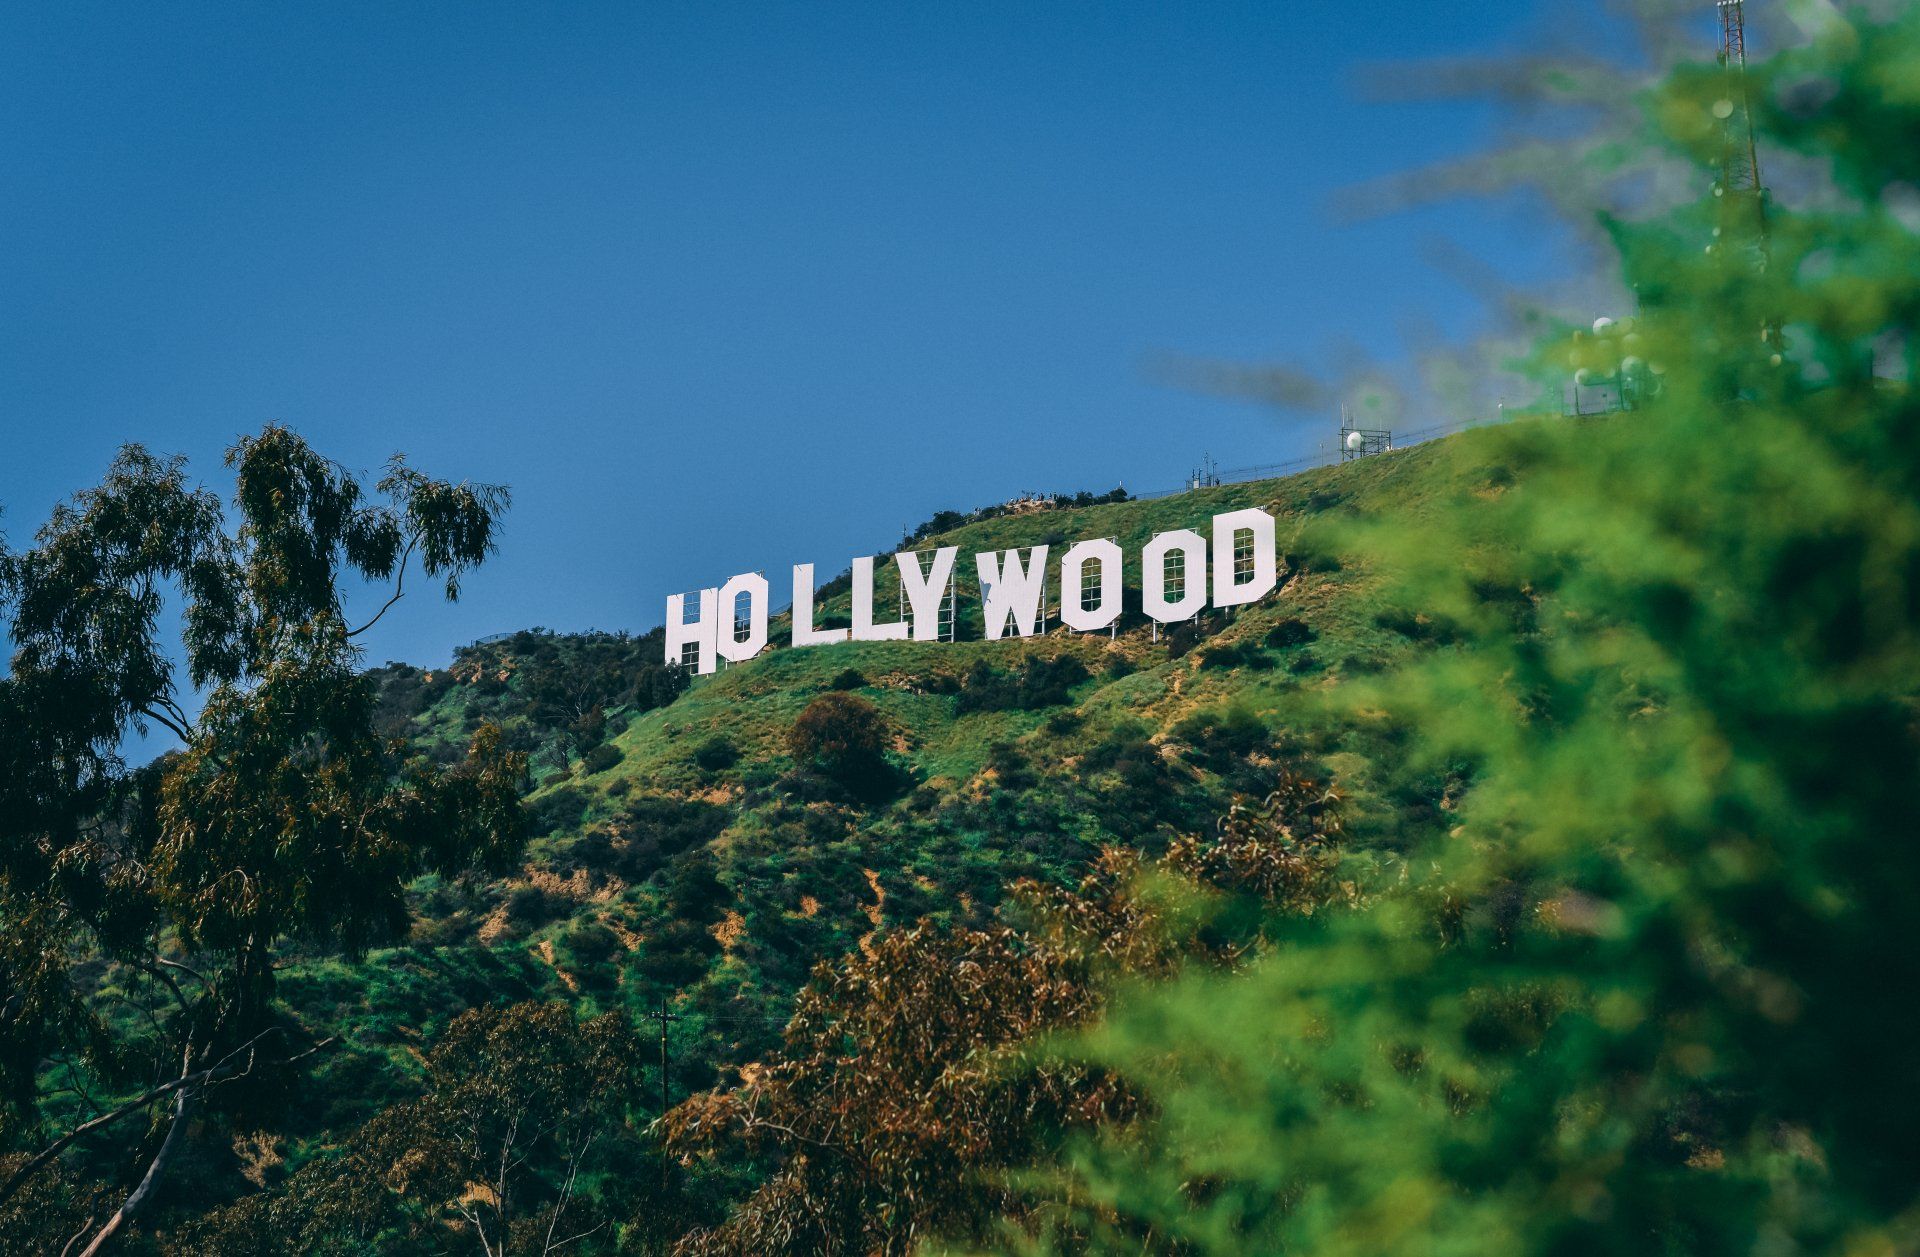 American Landmark The Hollywood Sign, Hollywood, Los Angeles, California, Hollywoodland Sign, it is situated on Mount Lee, in the Beachwood Canyon area of the Santa Monica Mountains, United States of America - USA and Canada Holidays Barter's Travelnet